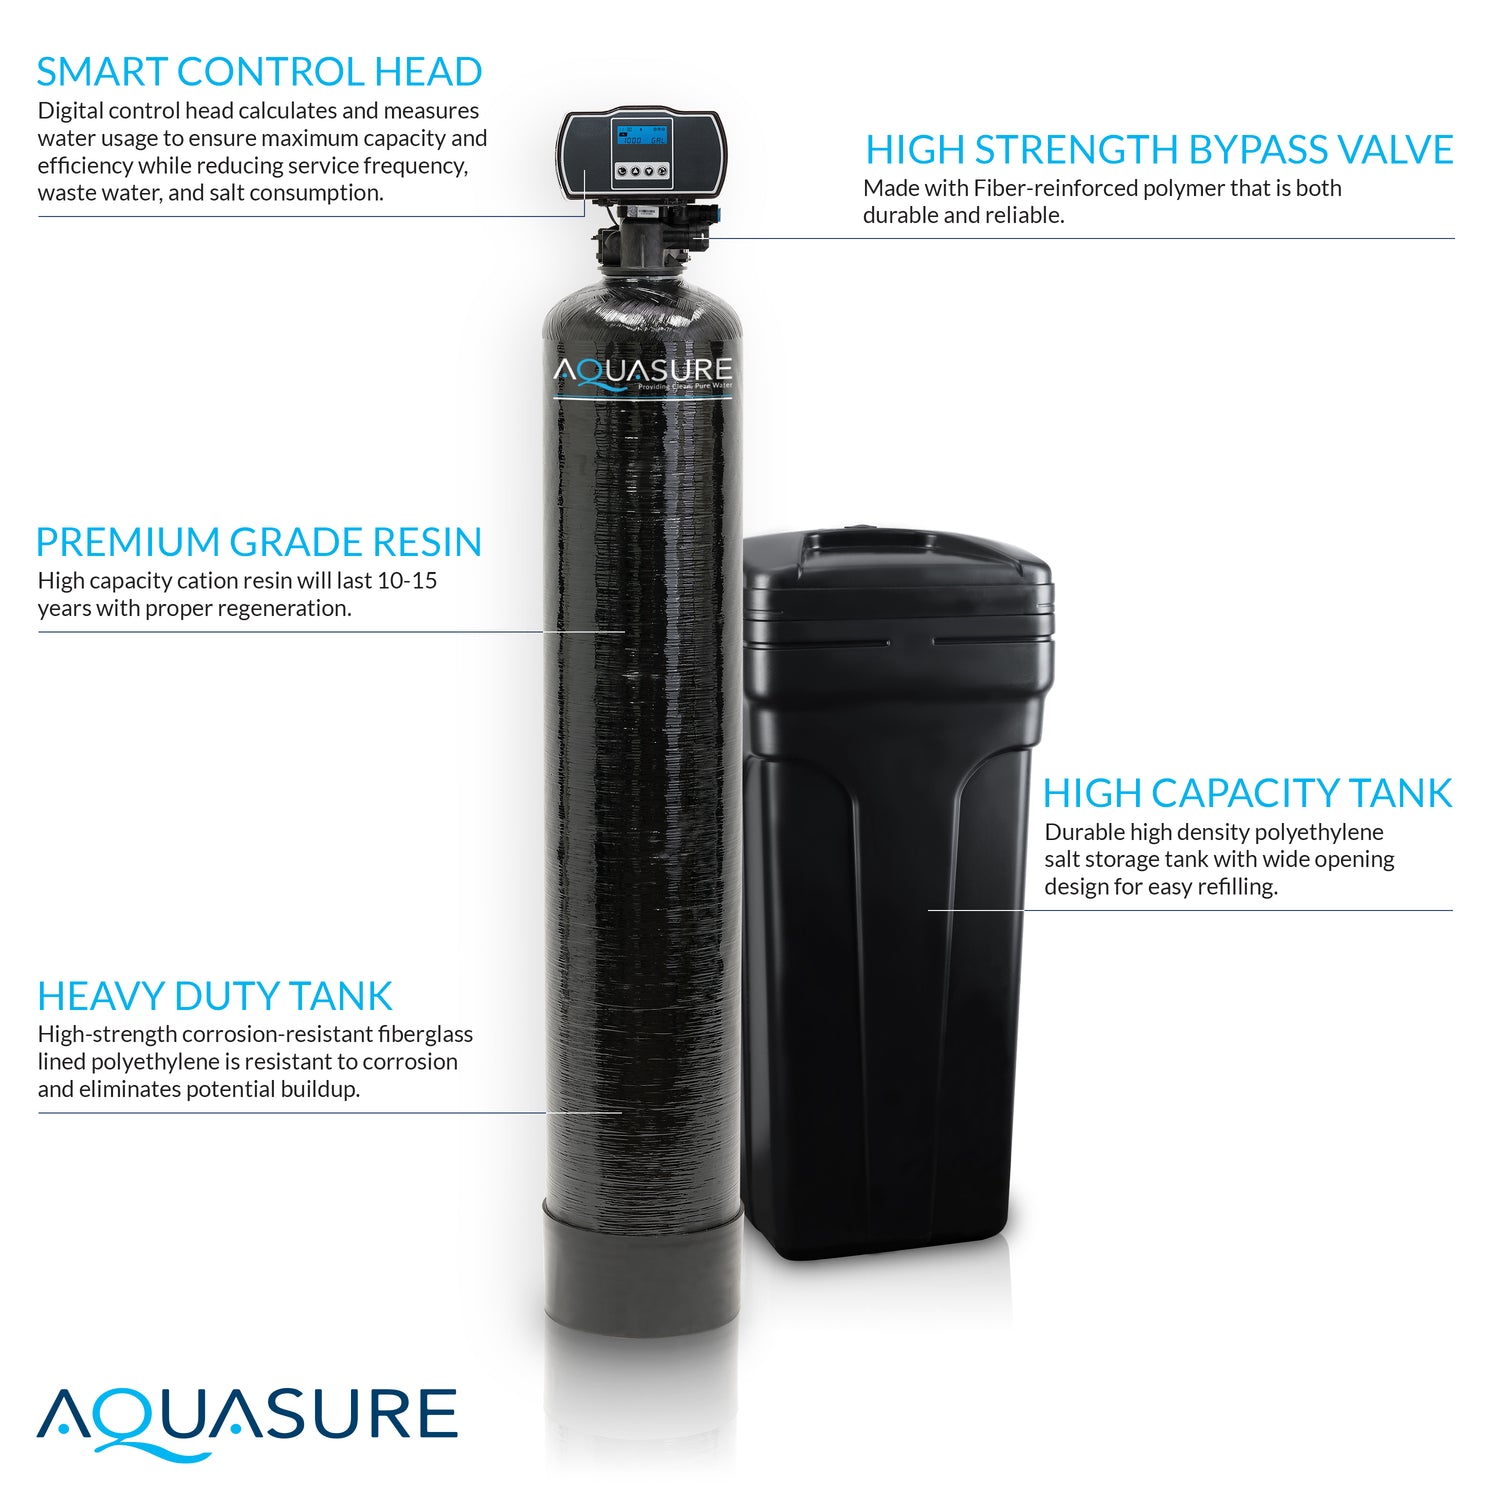 Signature Series | 64,000 Grains Water Softener with 12 GPM Quantum UV Sterilizer System and Triple Purpose Carbon Pre-Filter